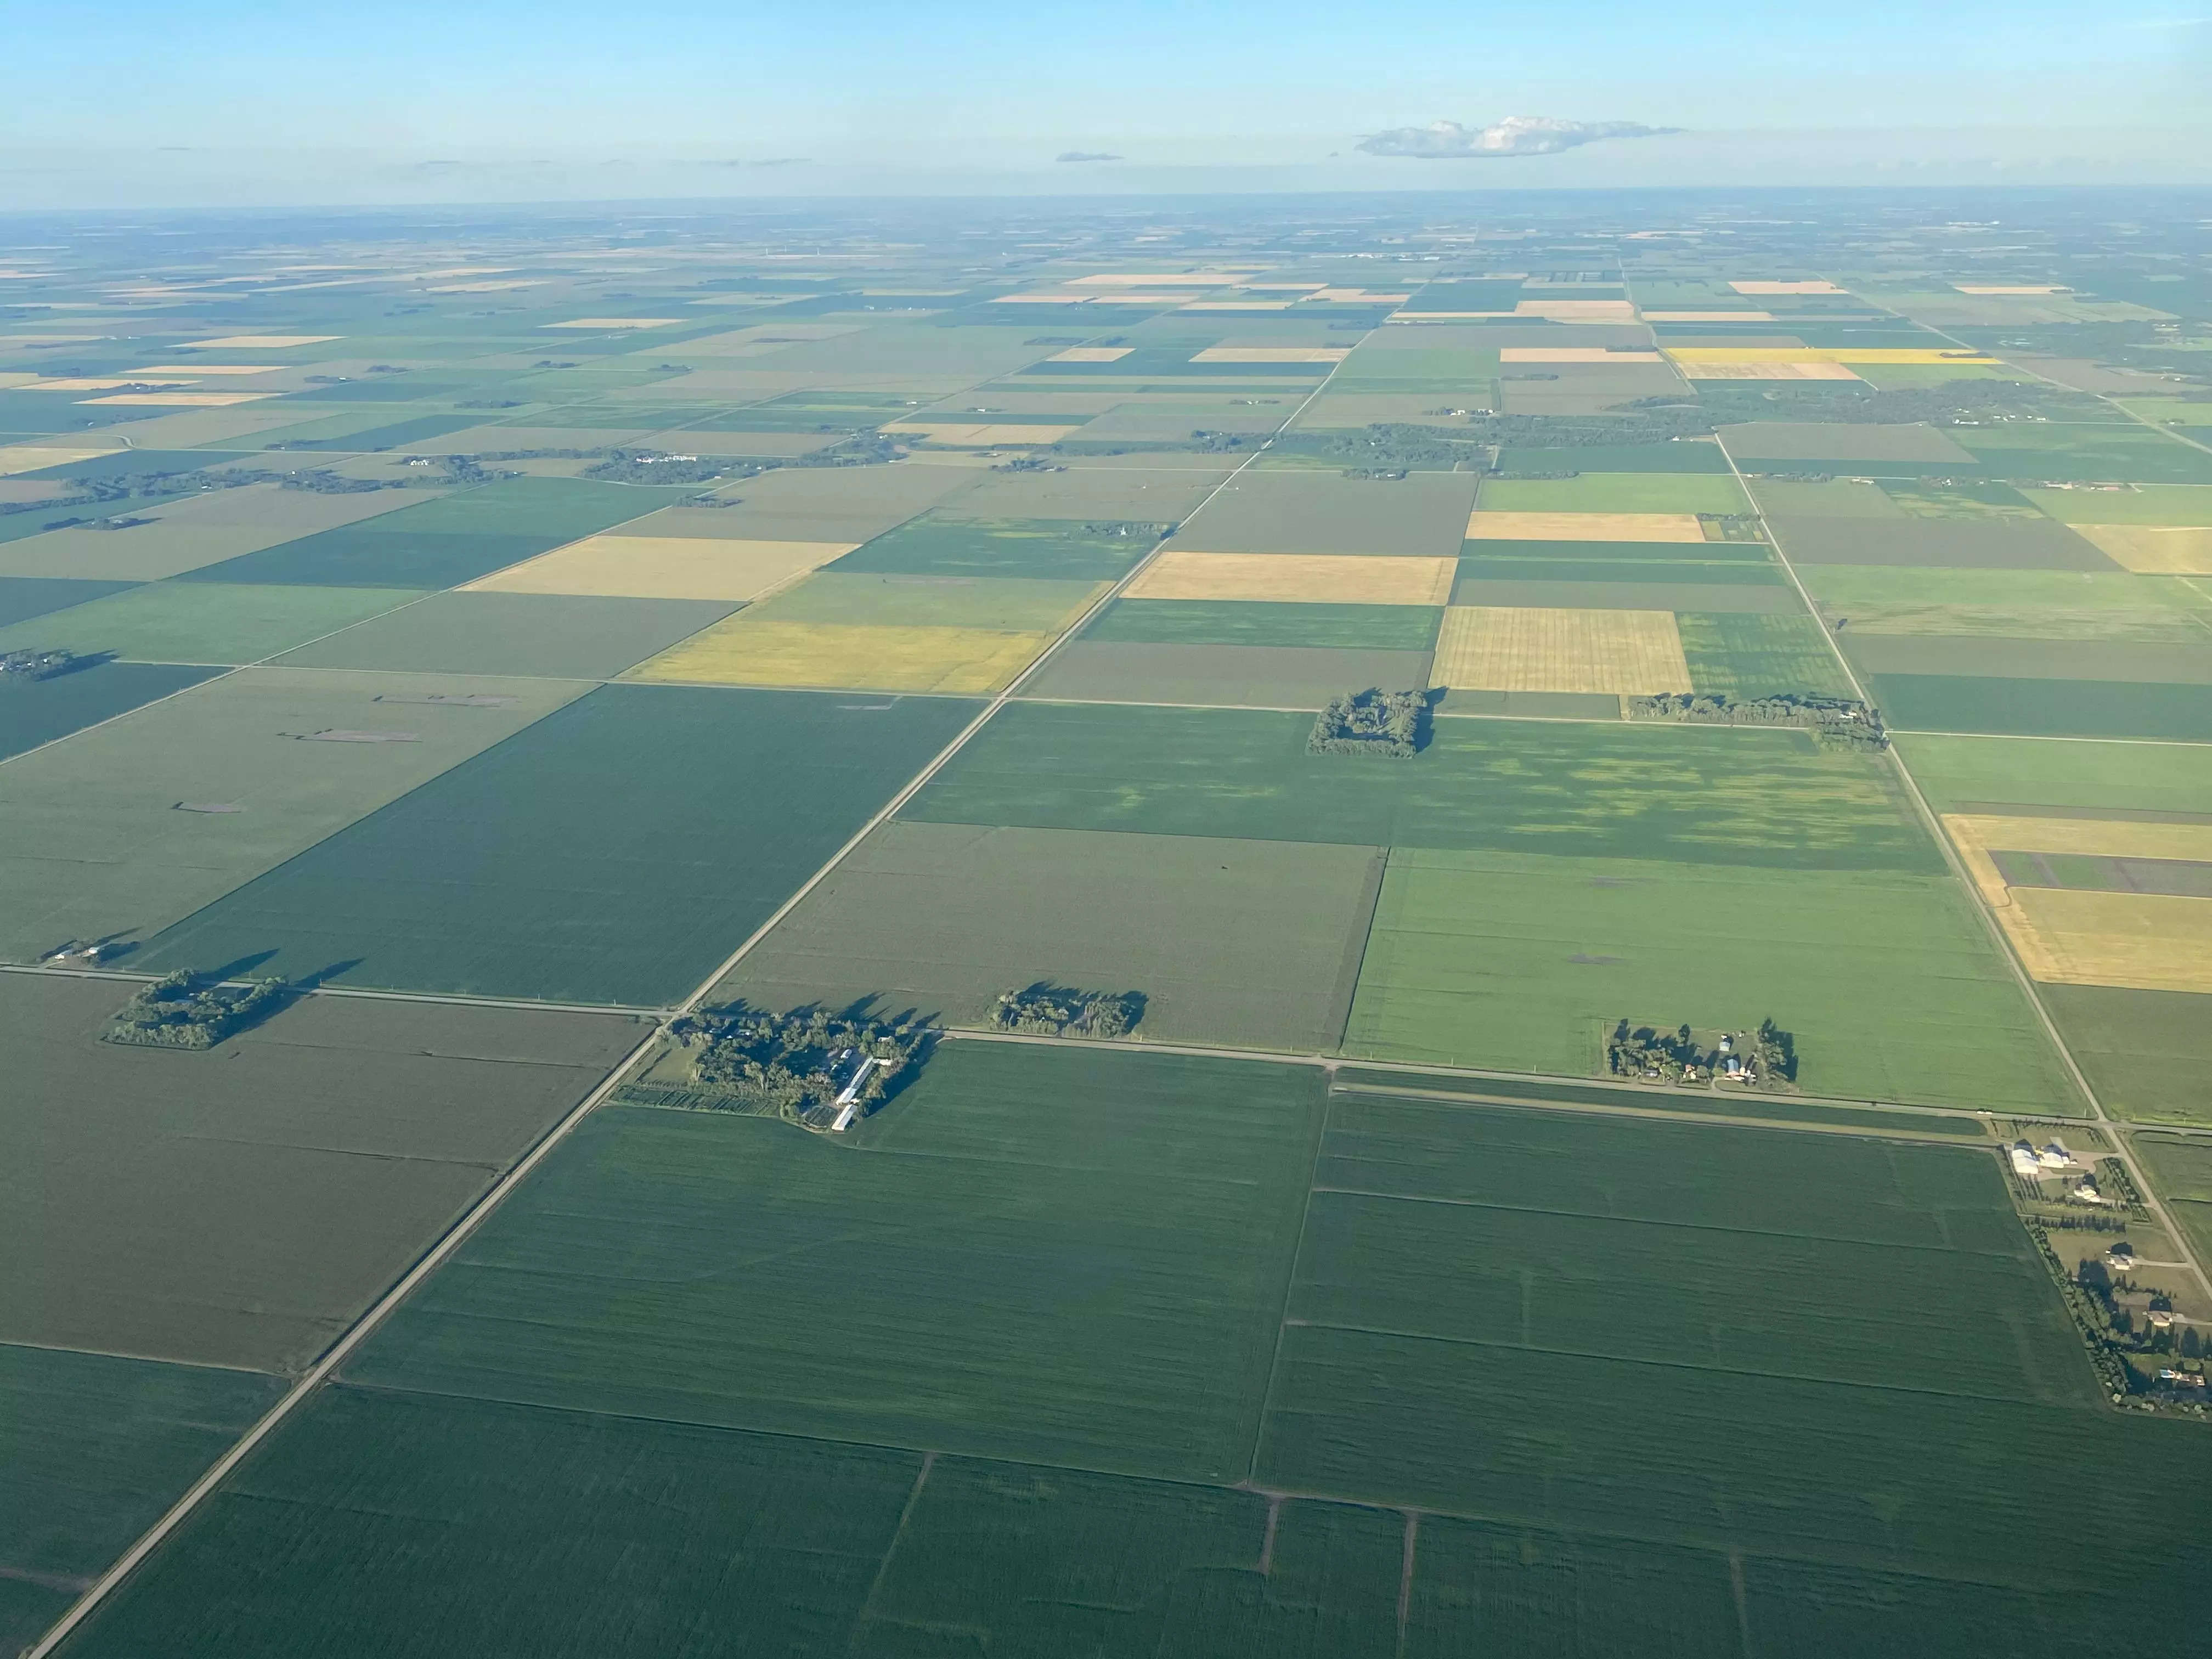 Aerial view of a grid including dozens of farm fields that are various shades of green and yellow.